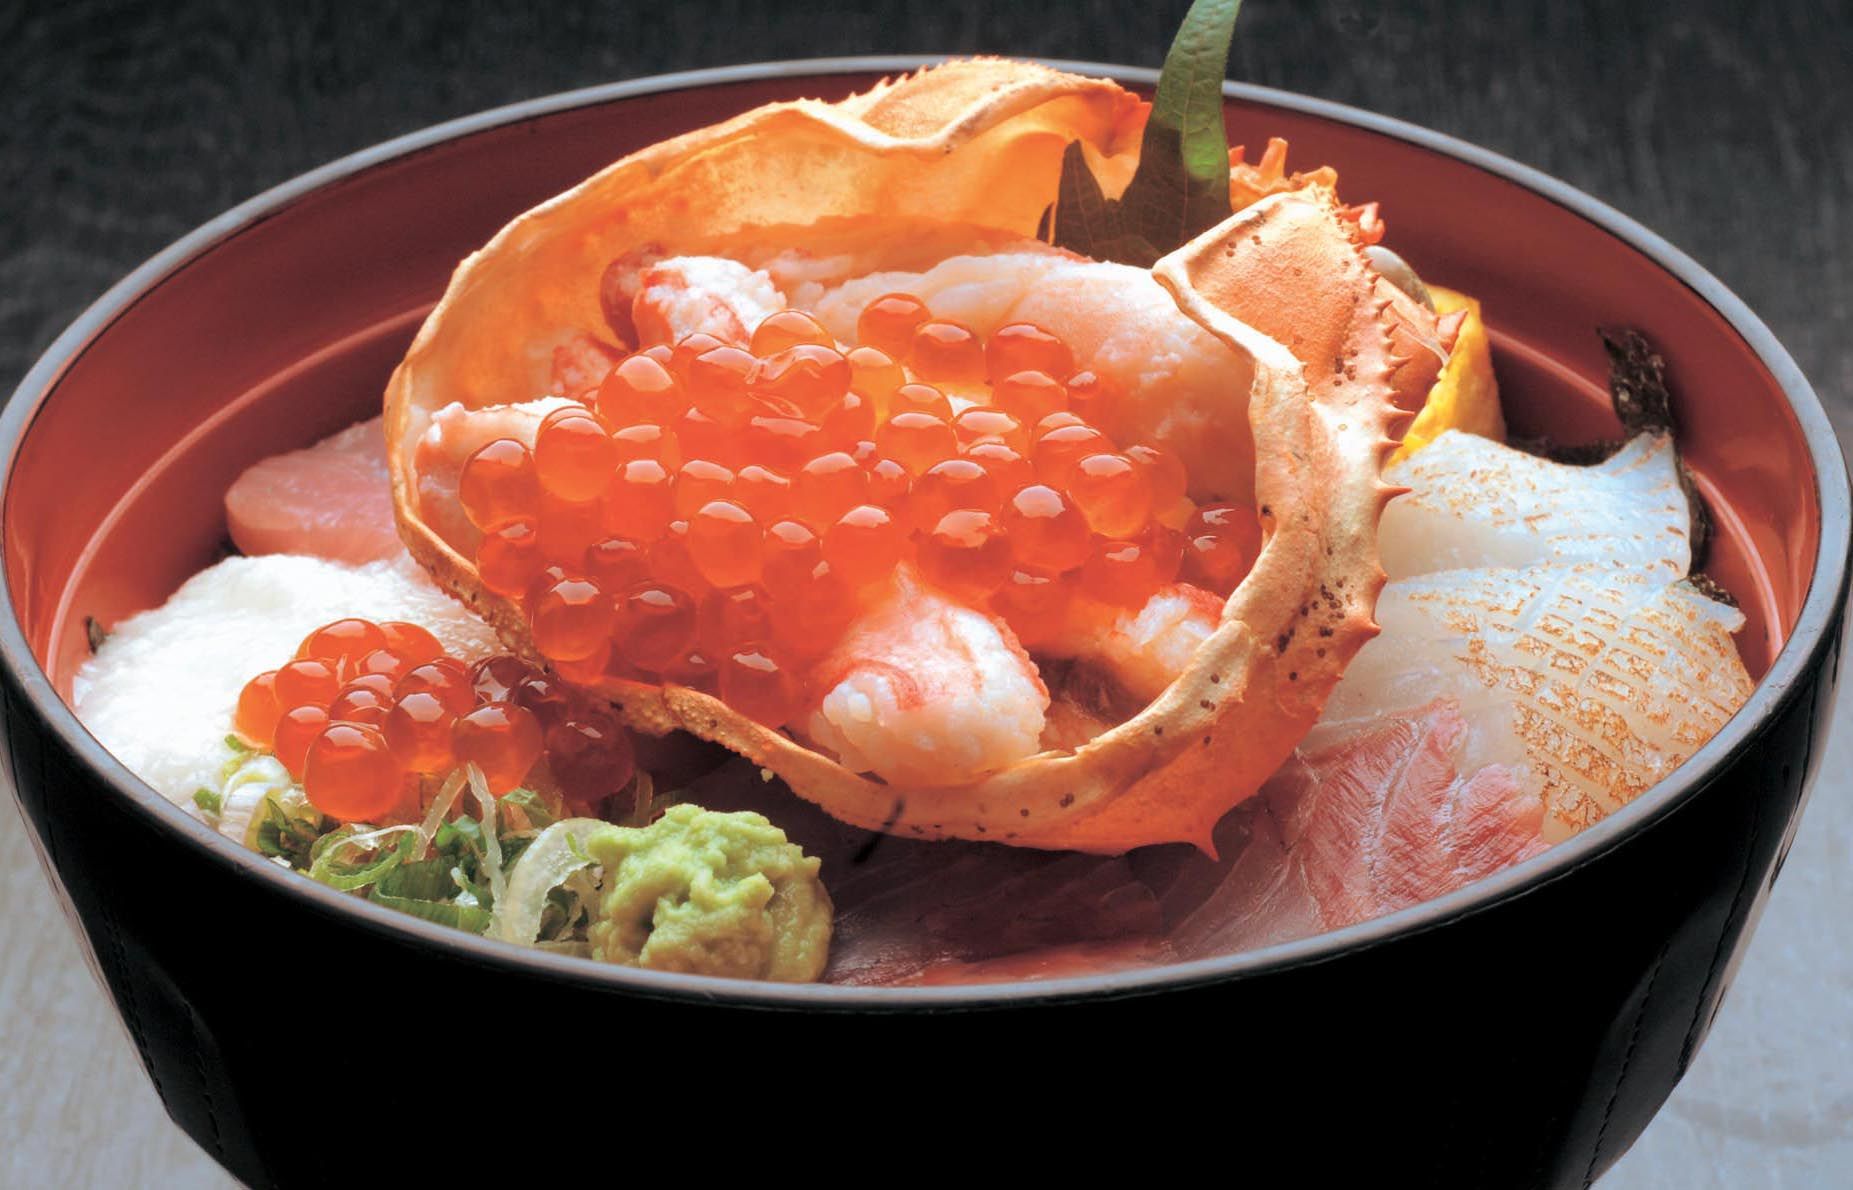 The famous market restaurant Karoko serves fresh seafood at reasonable prices. The generous Special Seafood Bowl at 2,180 yen is popular.